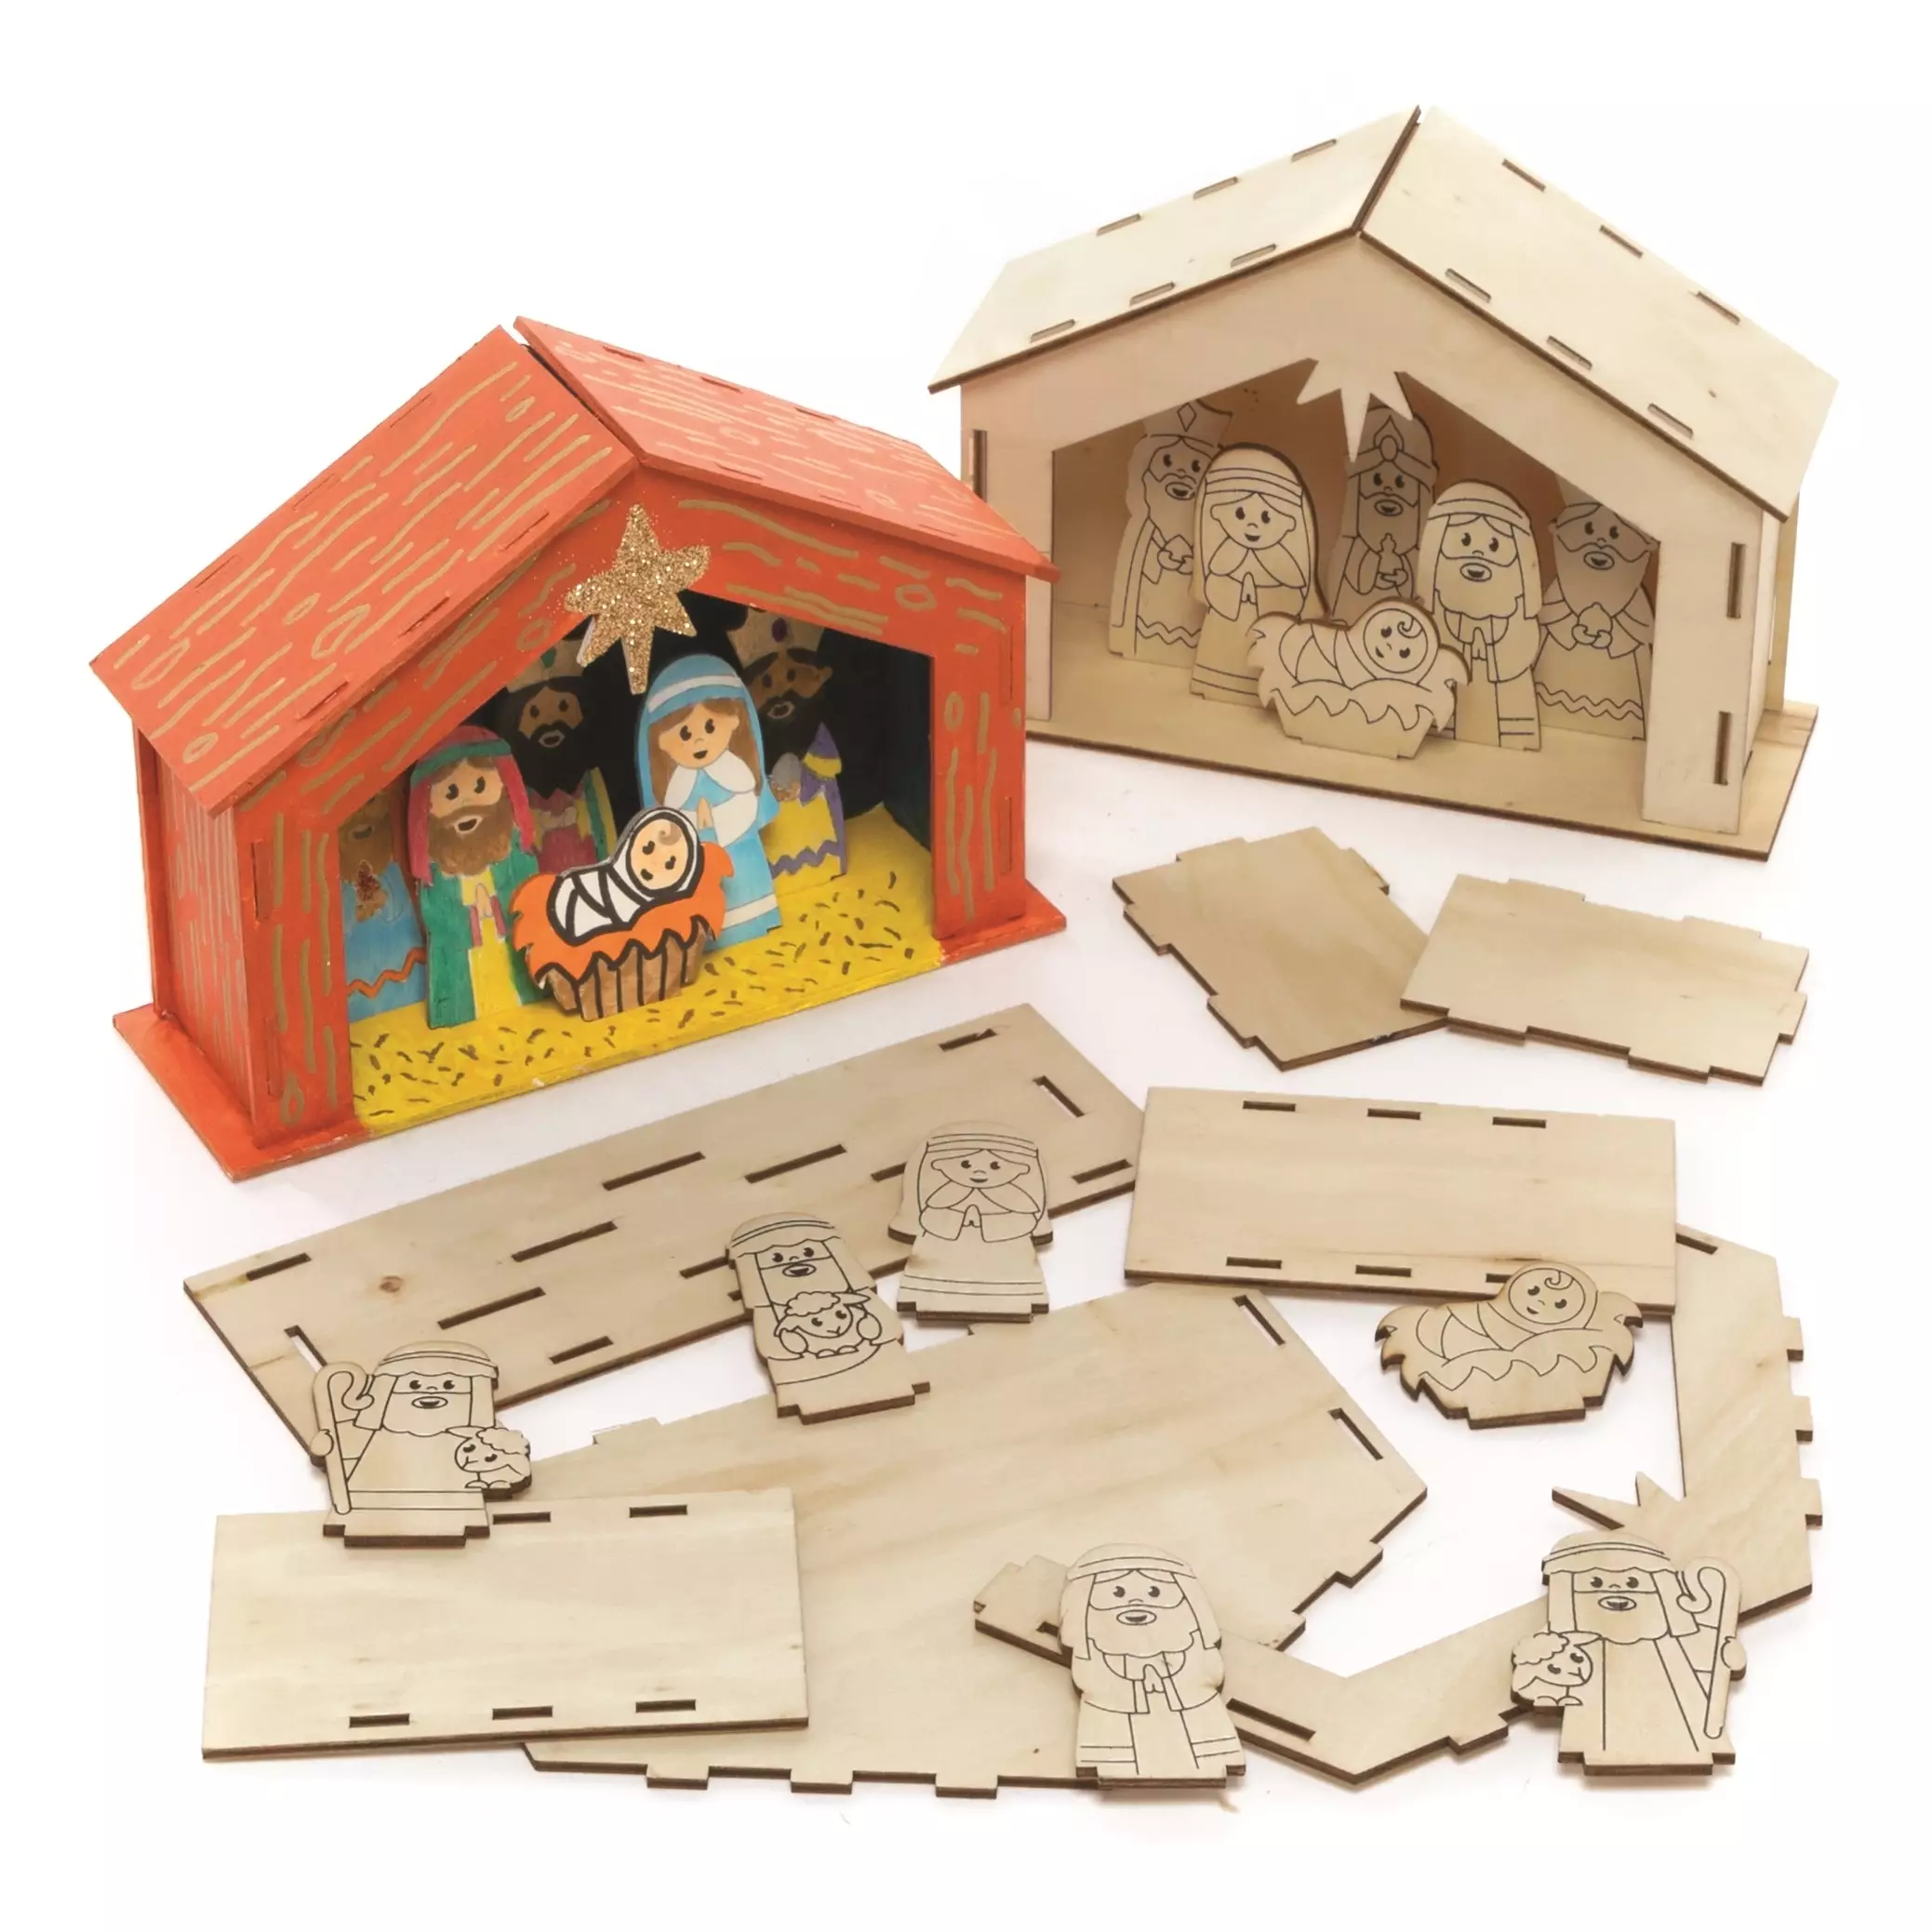 Wooden Nativity Stable Kits - Pack of 2